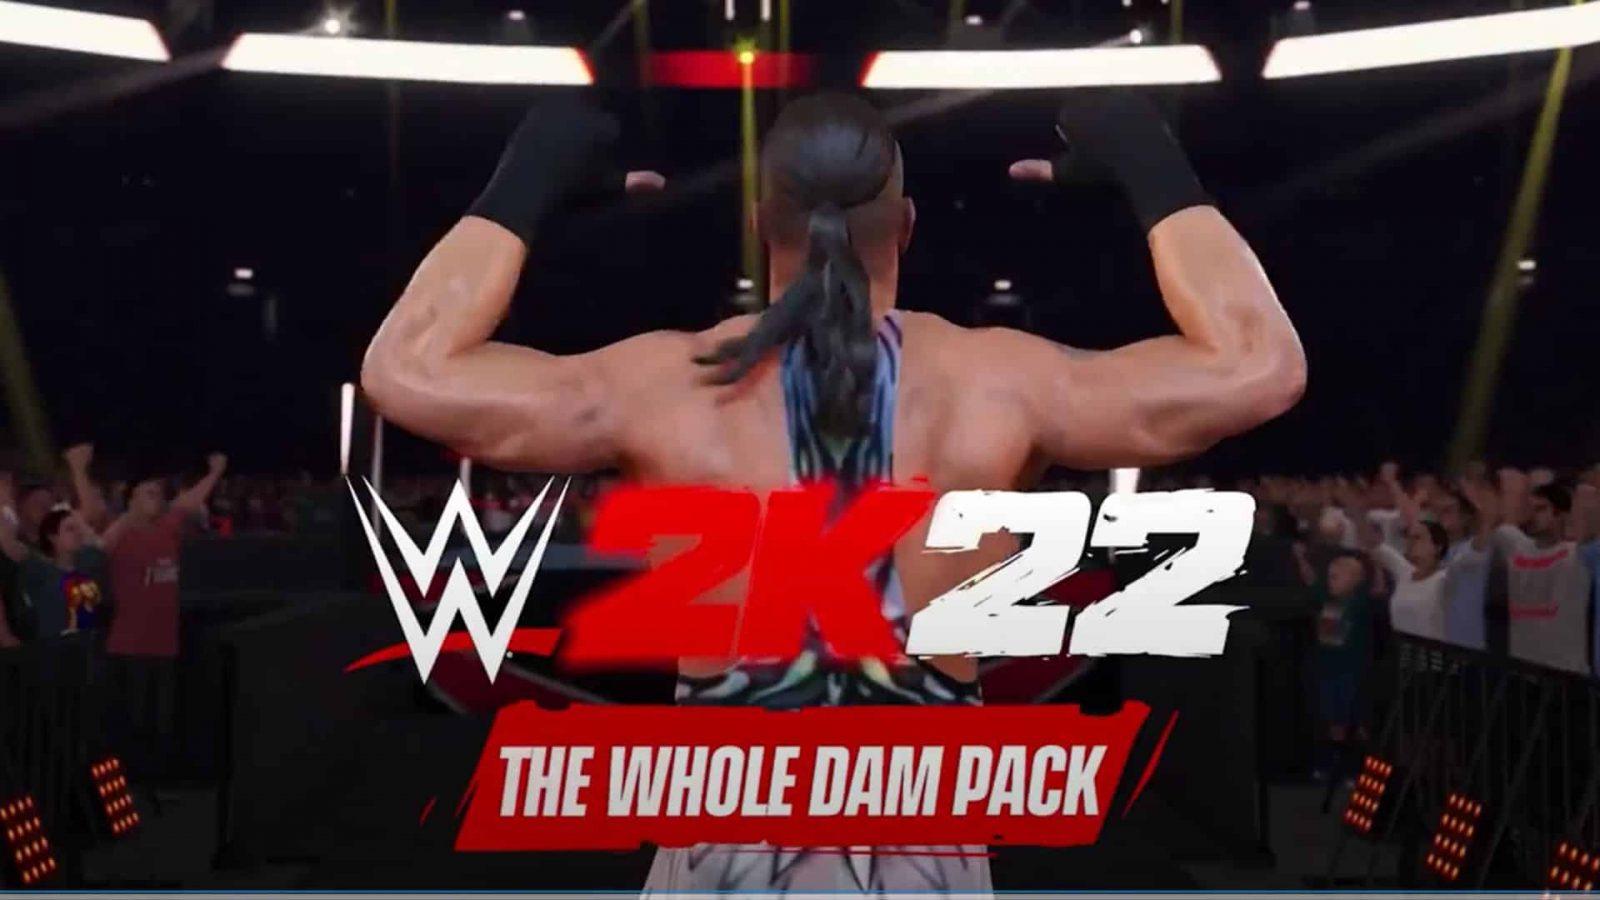 rob van dam doing taunt in wwe 2k22 entrance